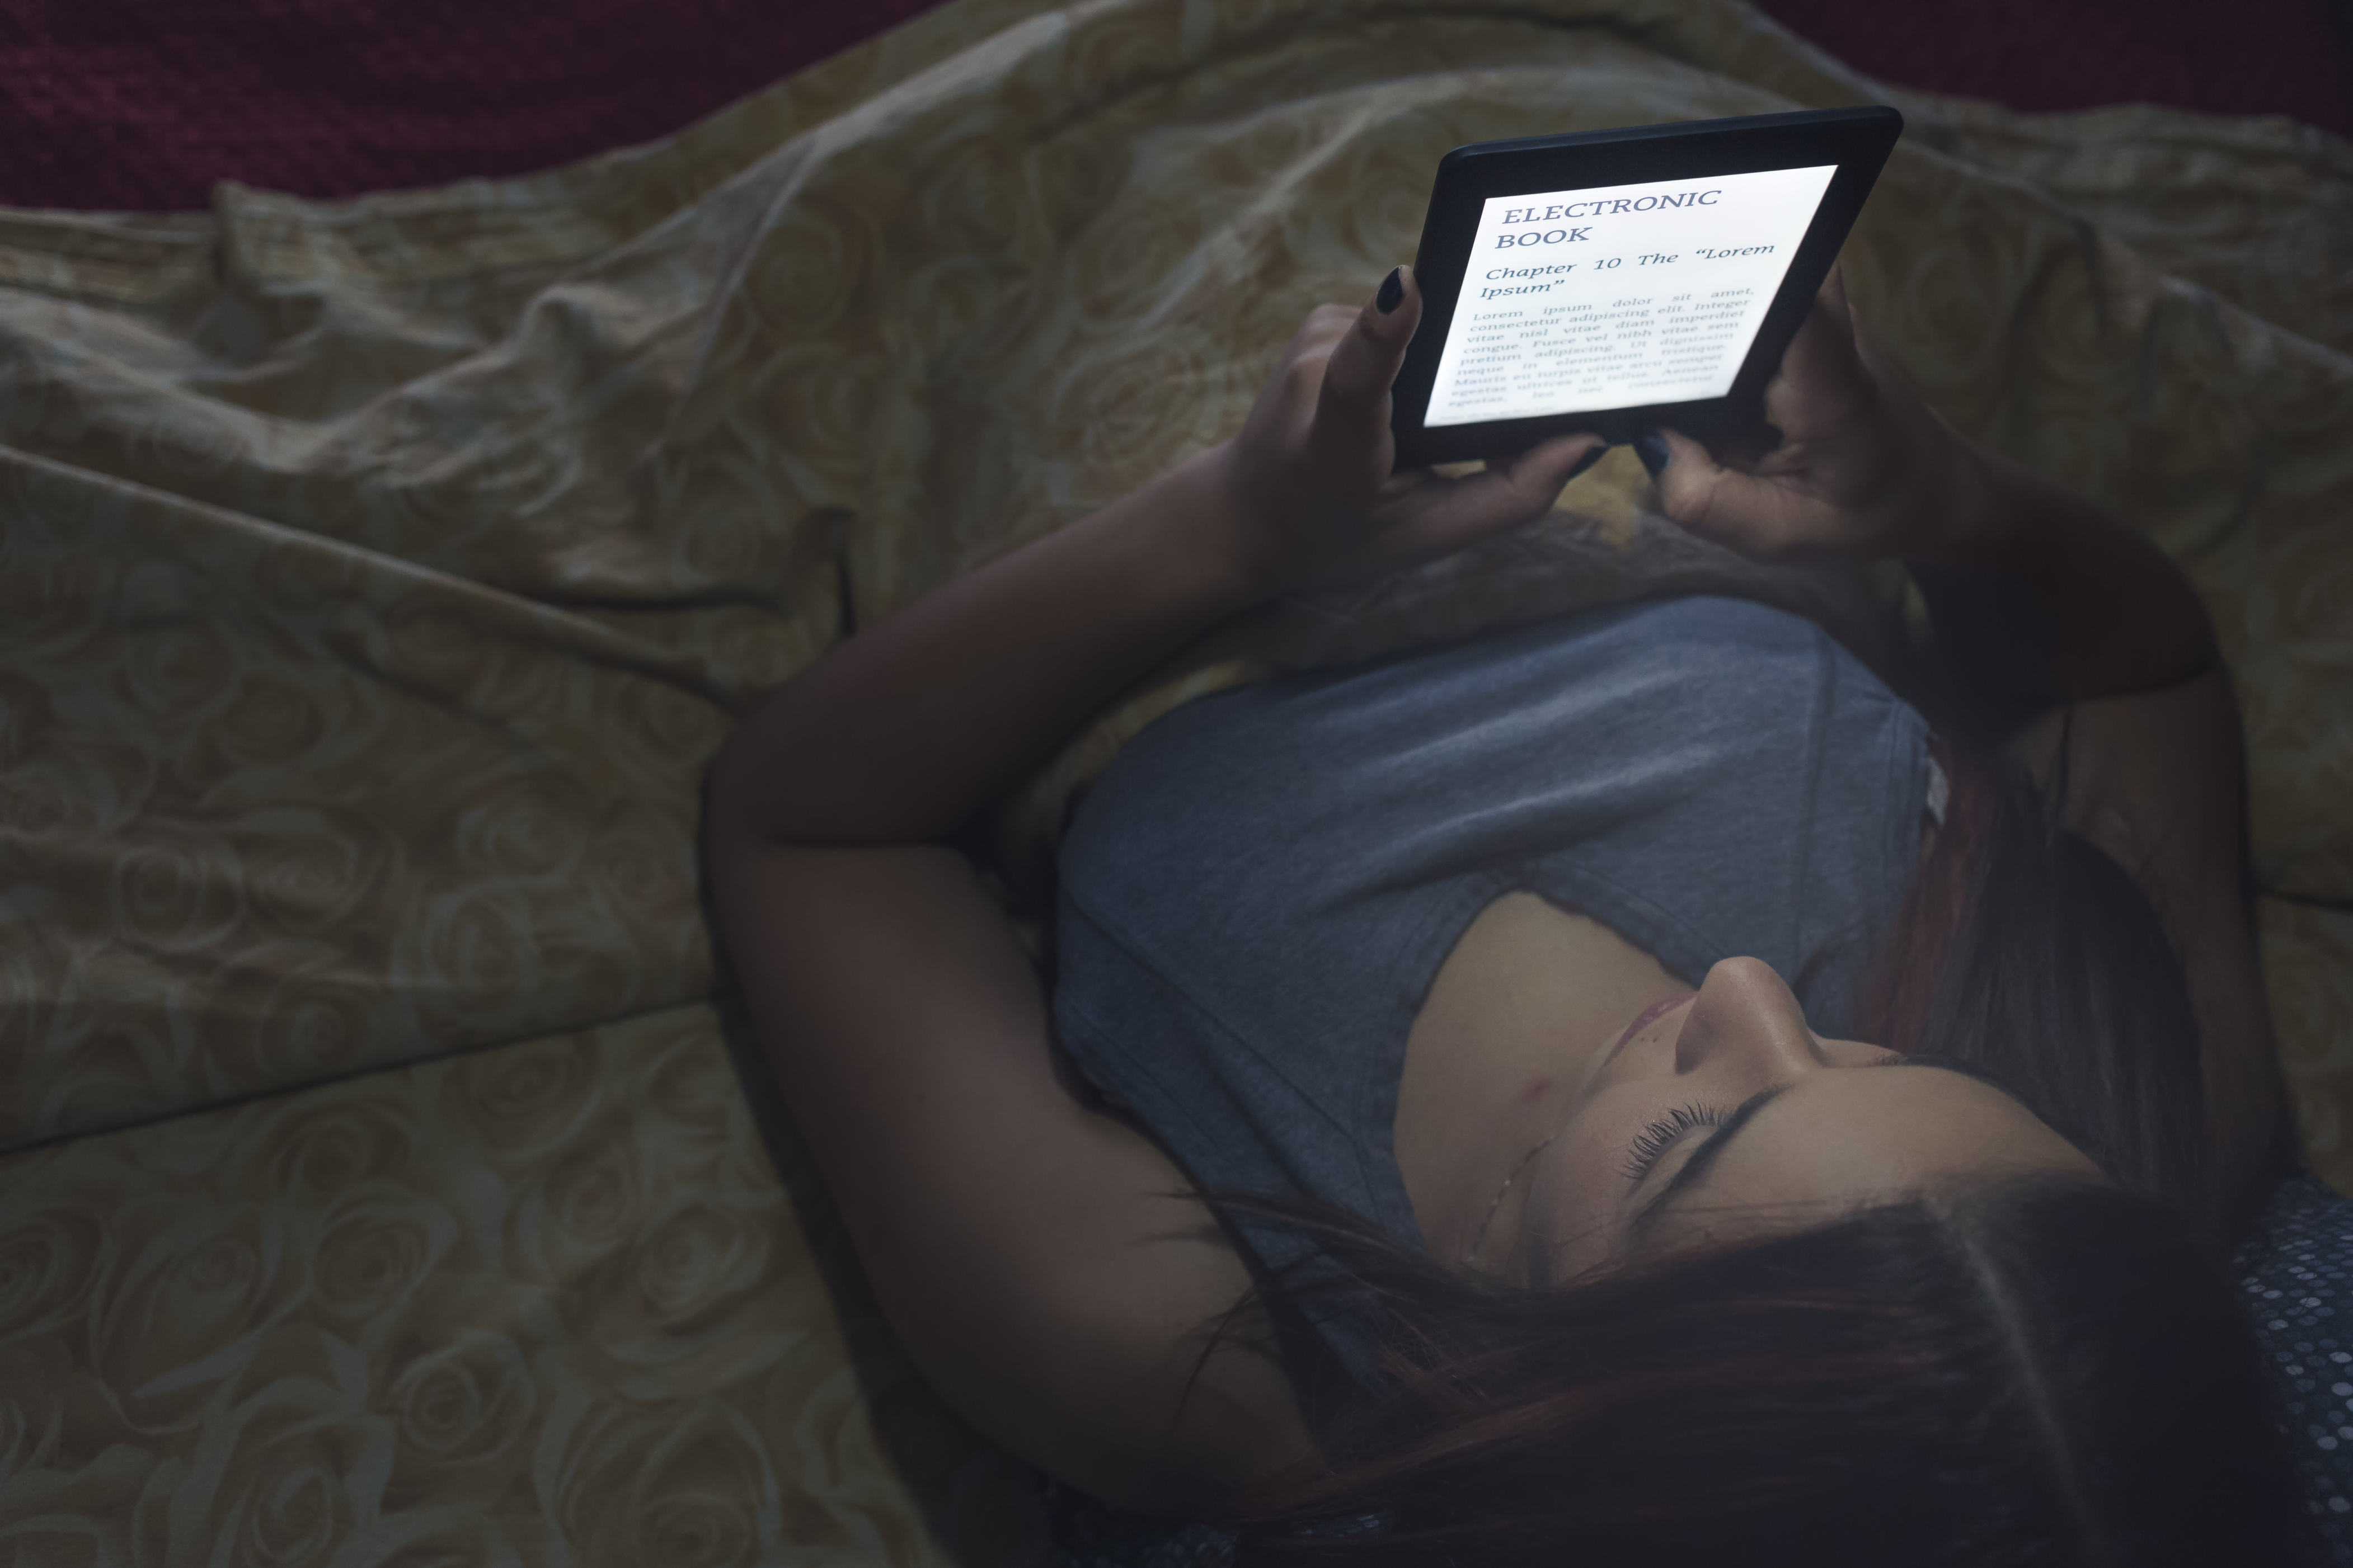 A woman reads an e-book in bed.